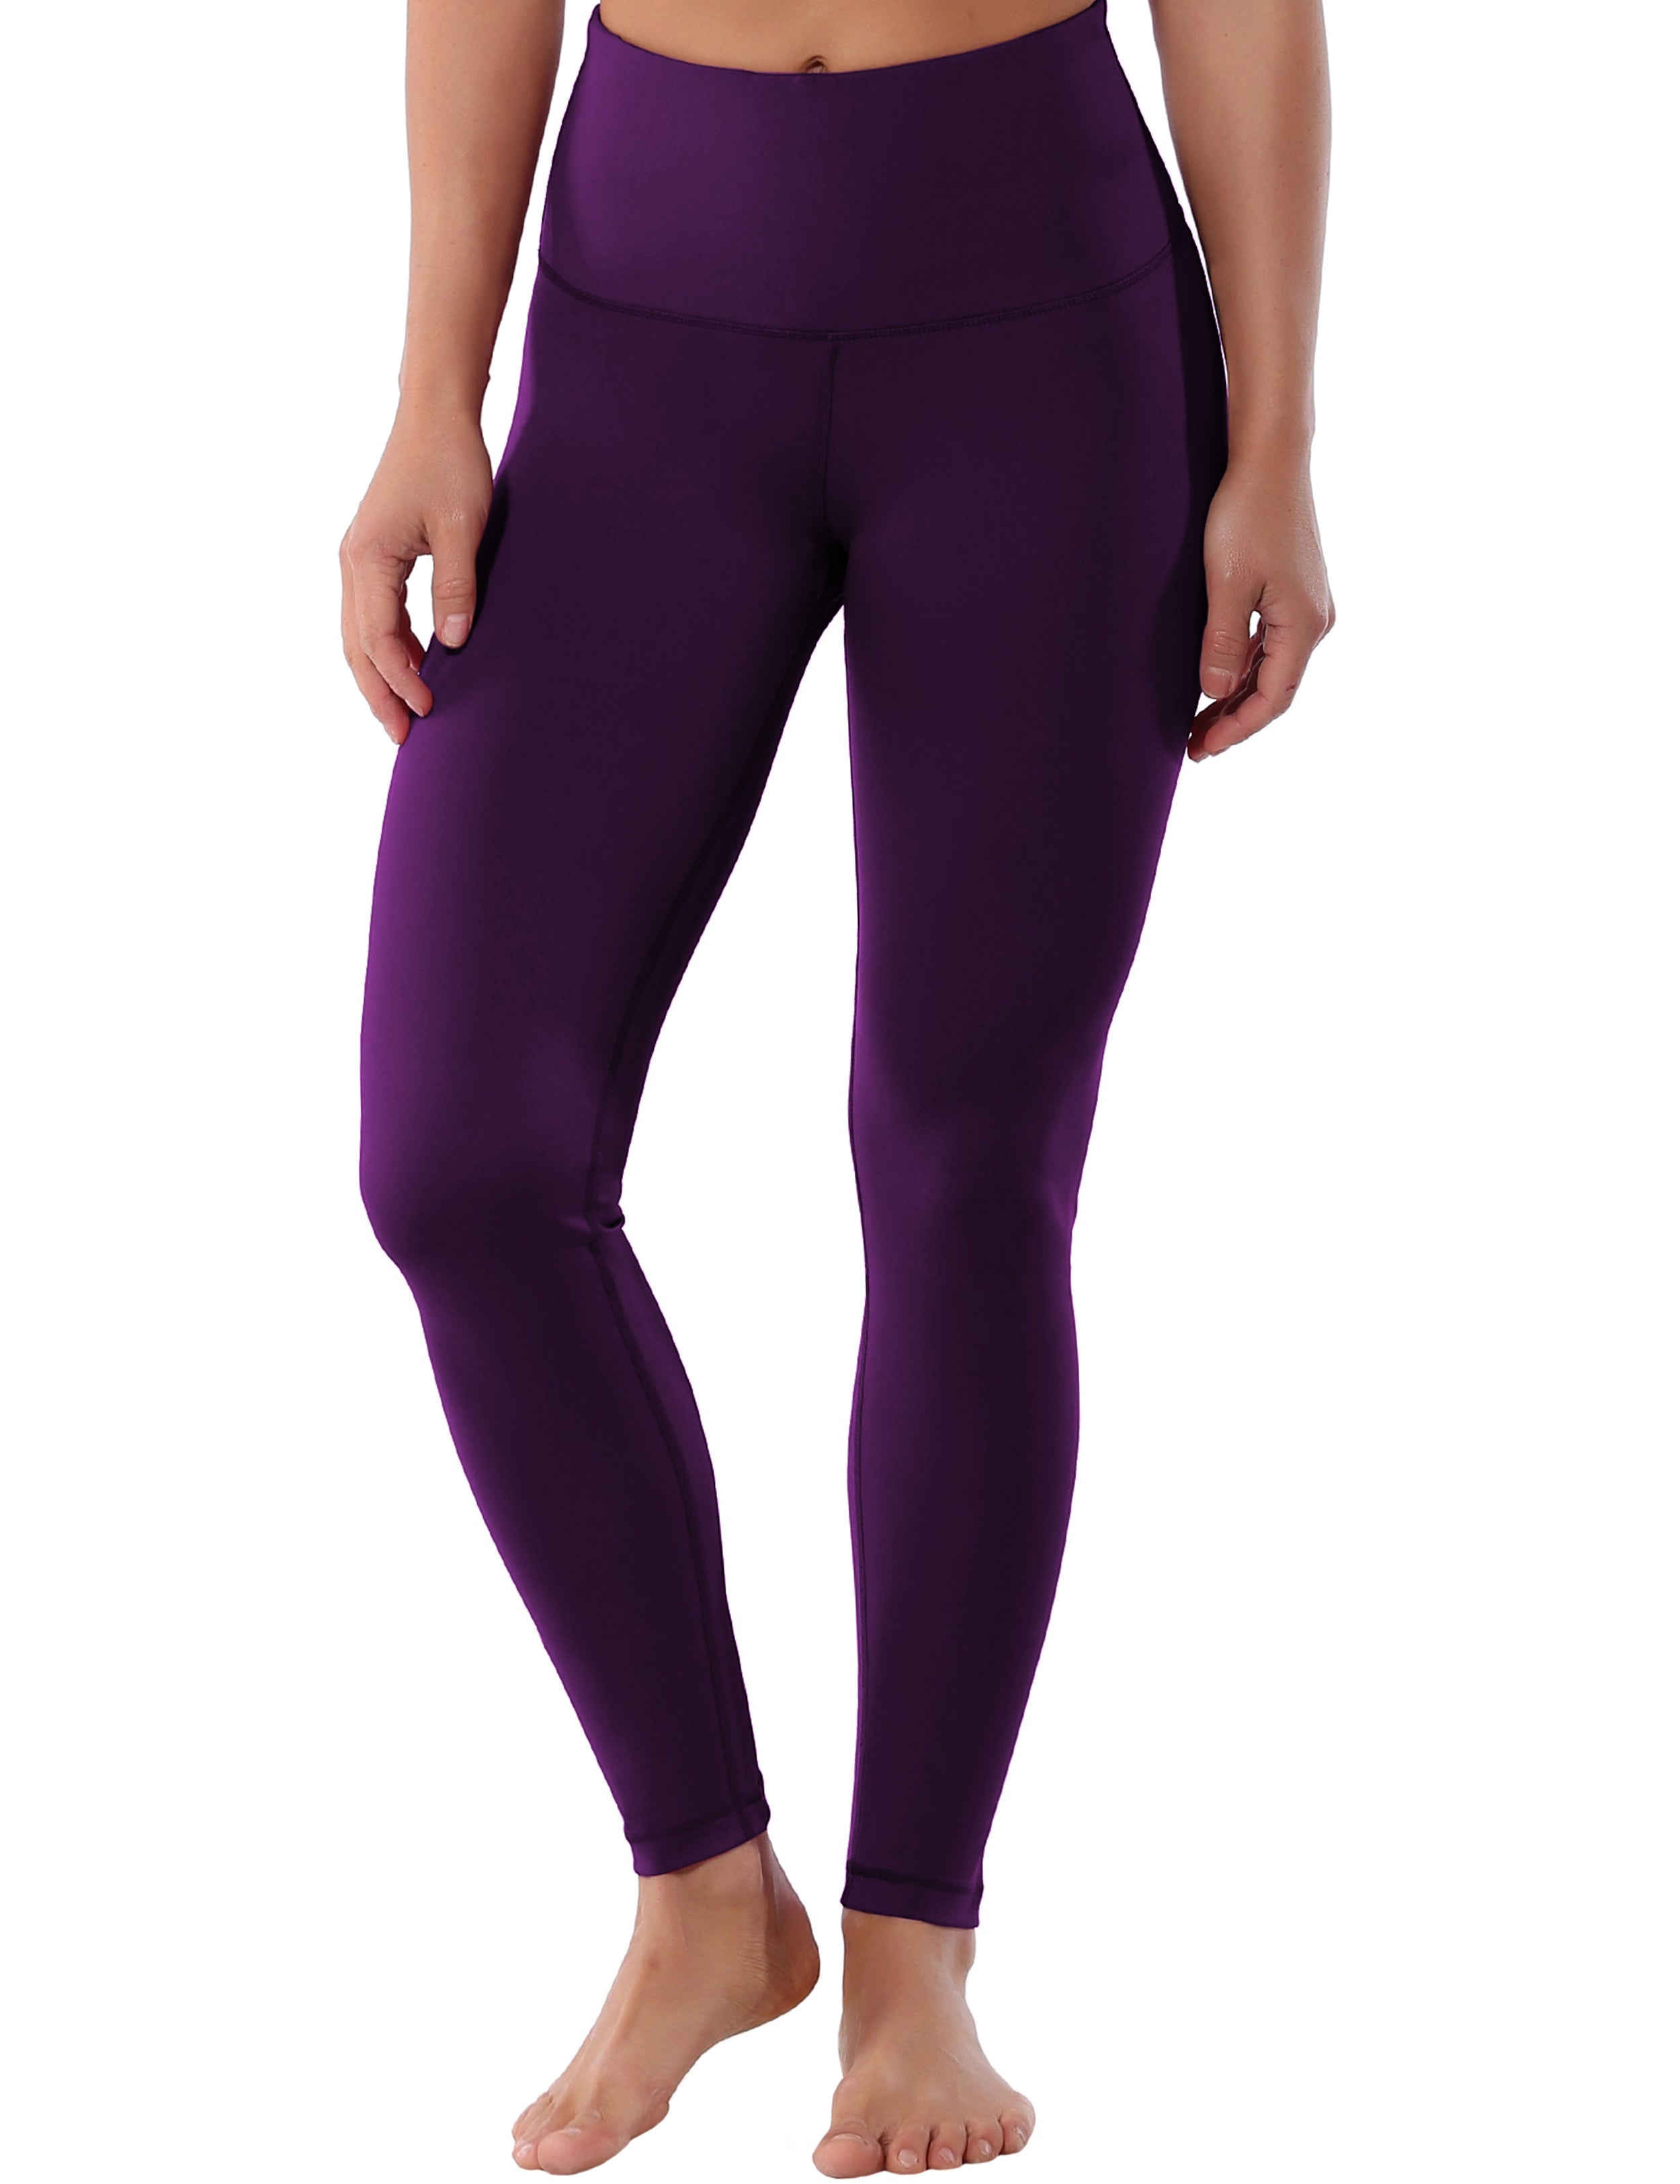 High Waist Biking Pants plum 75%Nylon/25%Spandex Fabric doesn't attract lint easily 4-way stretch No see-through Moisture-wicking Tummy control Inner pocket Four lengths